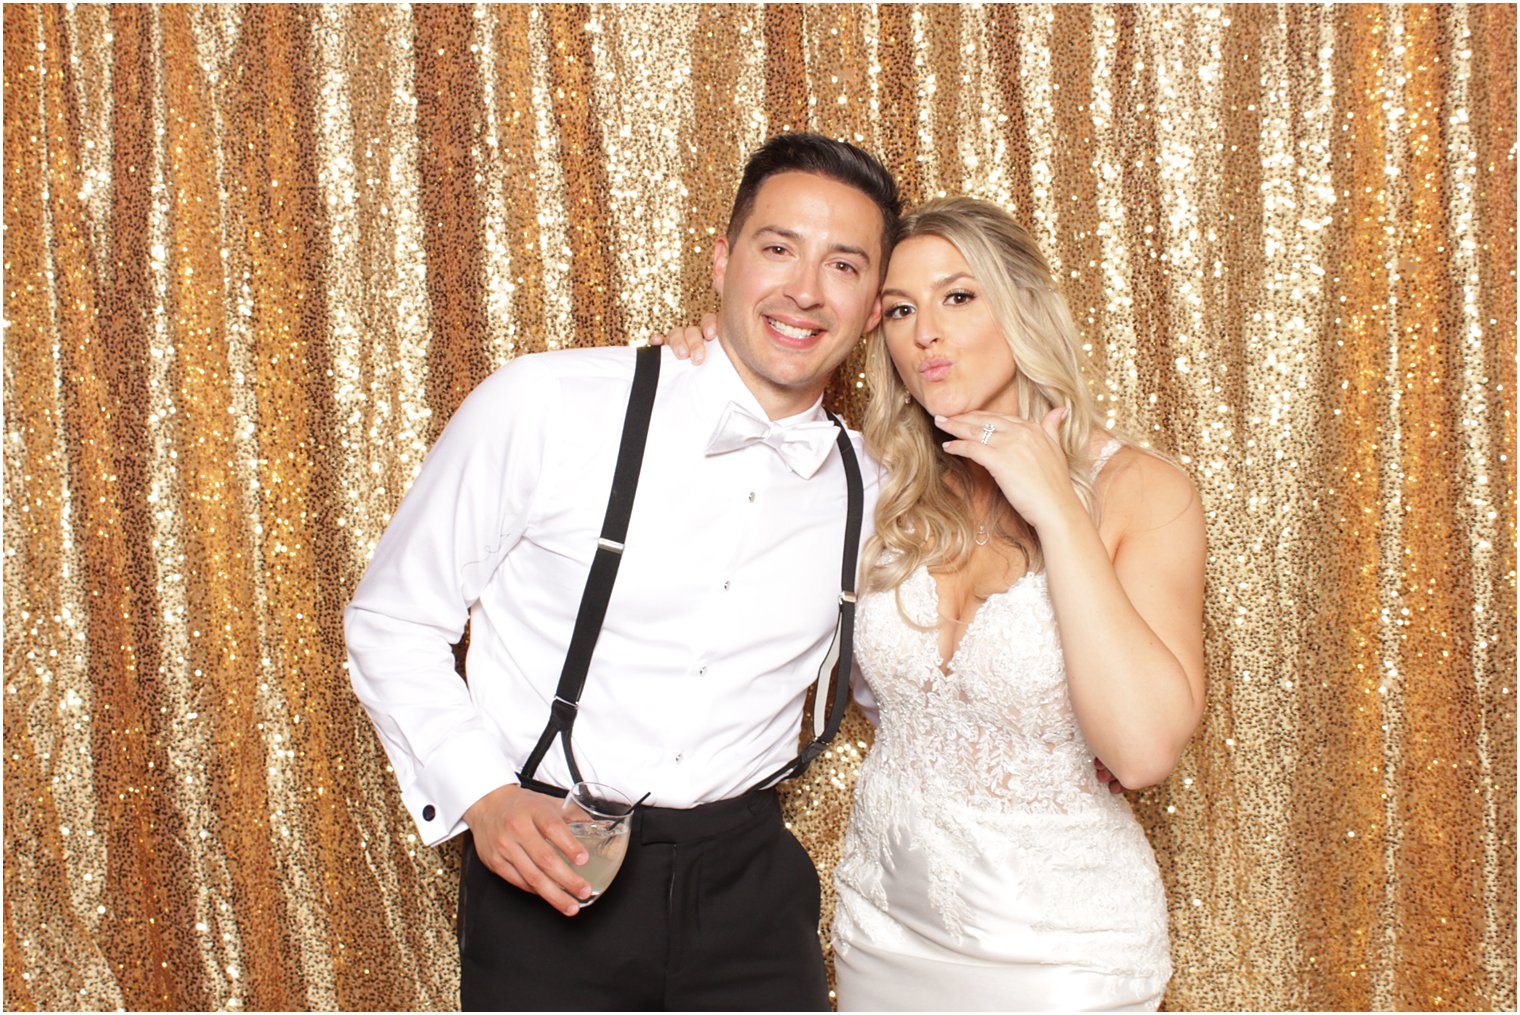 newlyweds pose in Photo Booth at NJ wedding